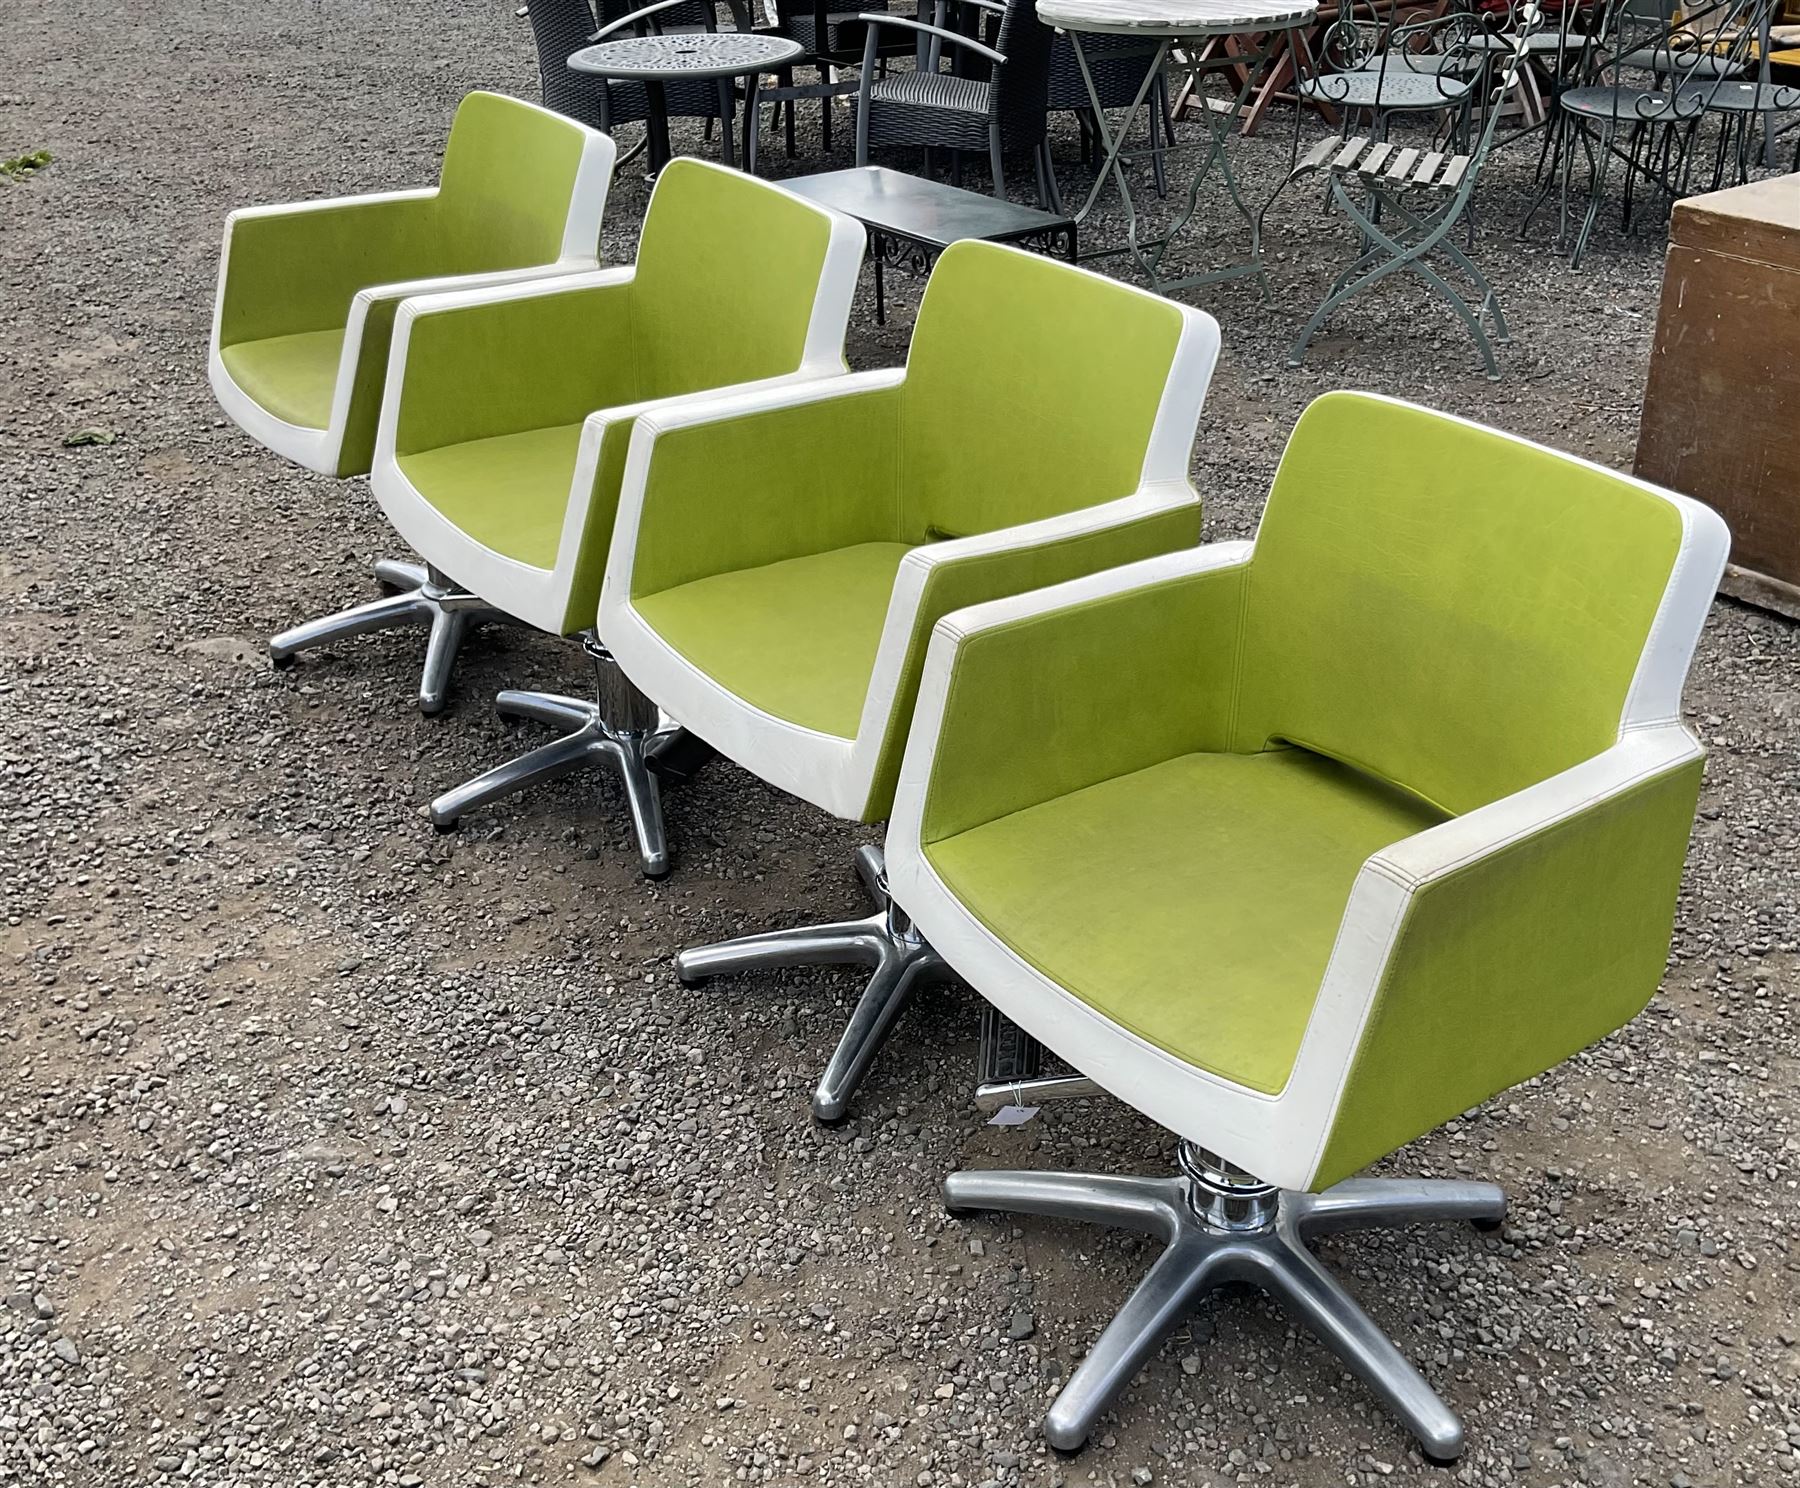 Salon Equipment - Set of four green and white faux leather hydraulic styling salon chairs - THIS LOT